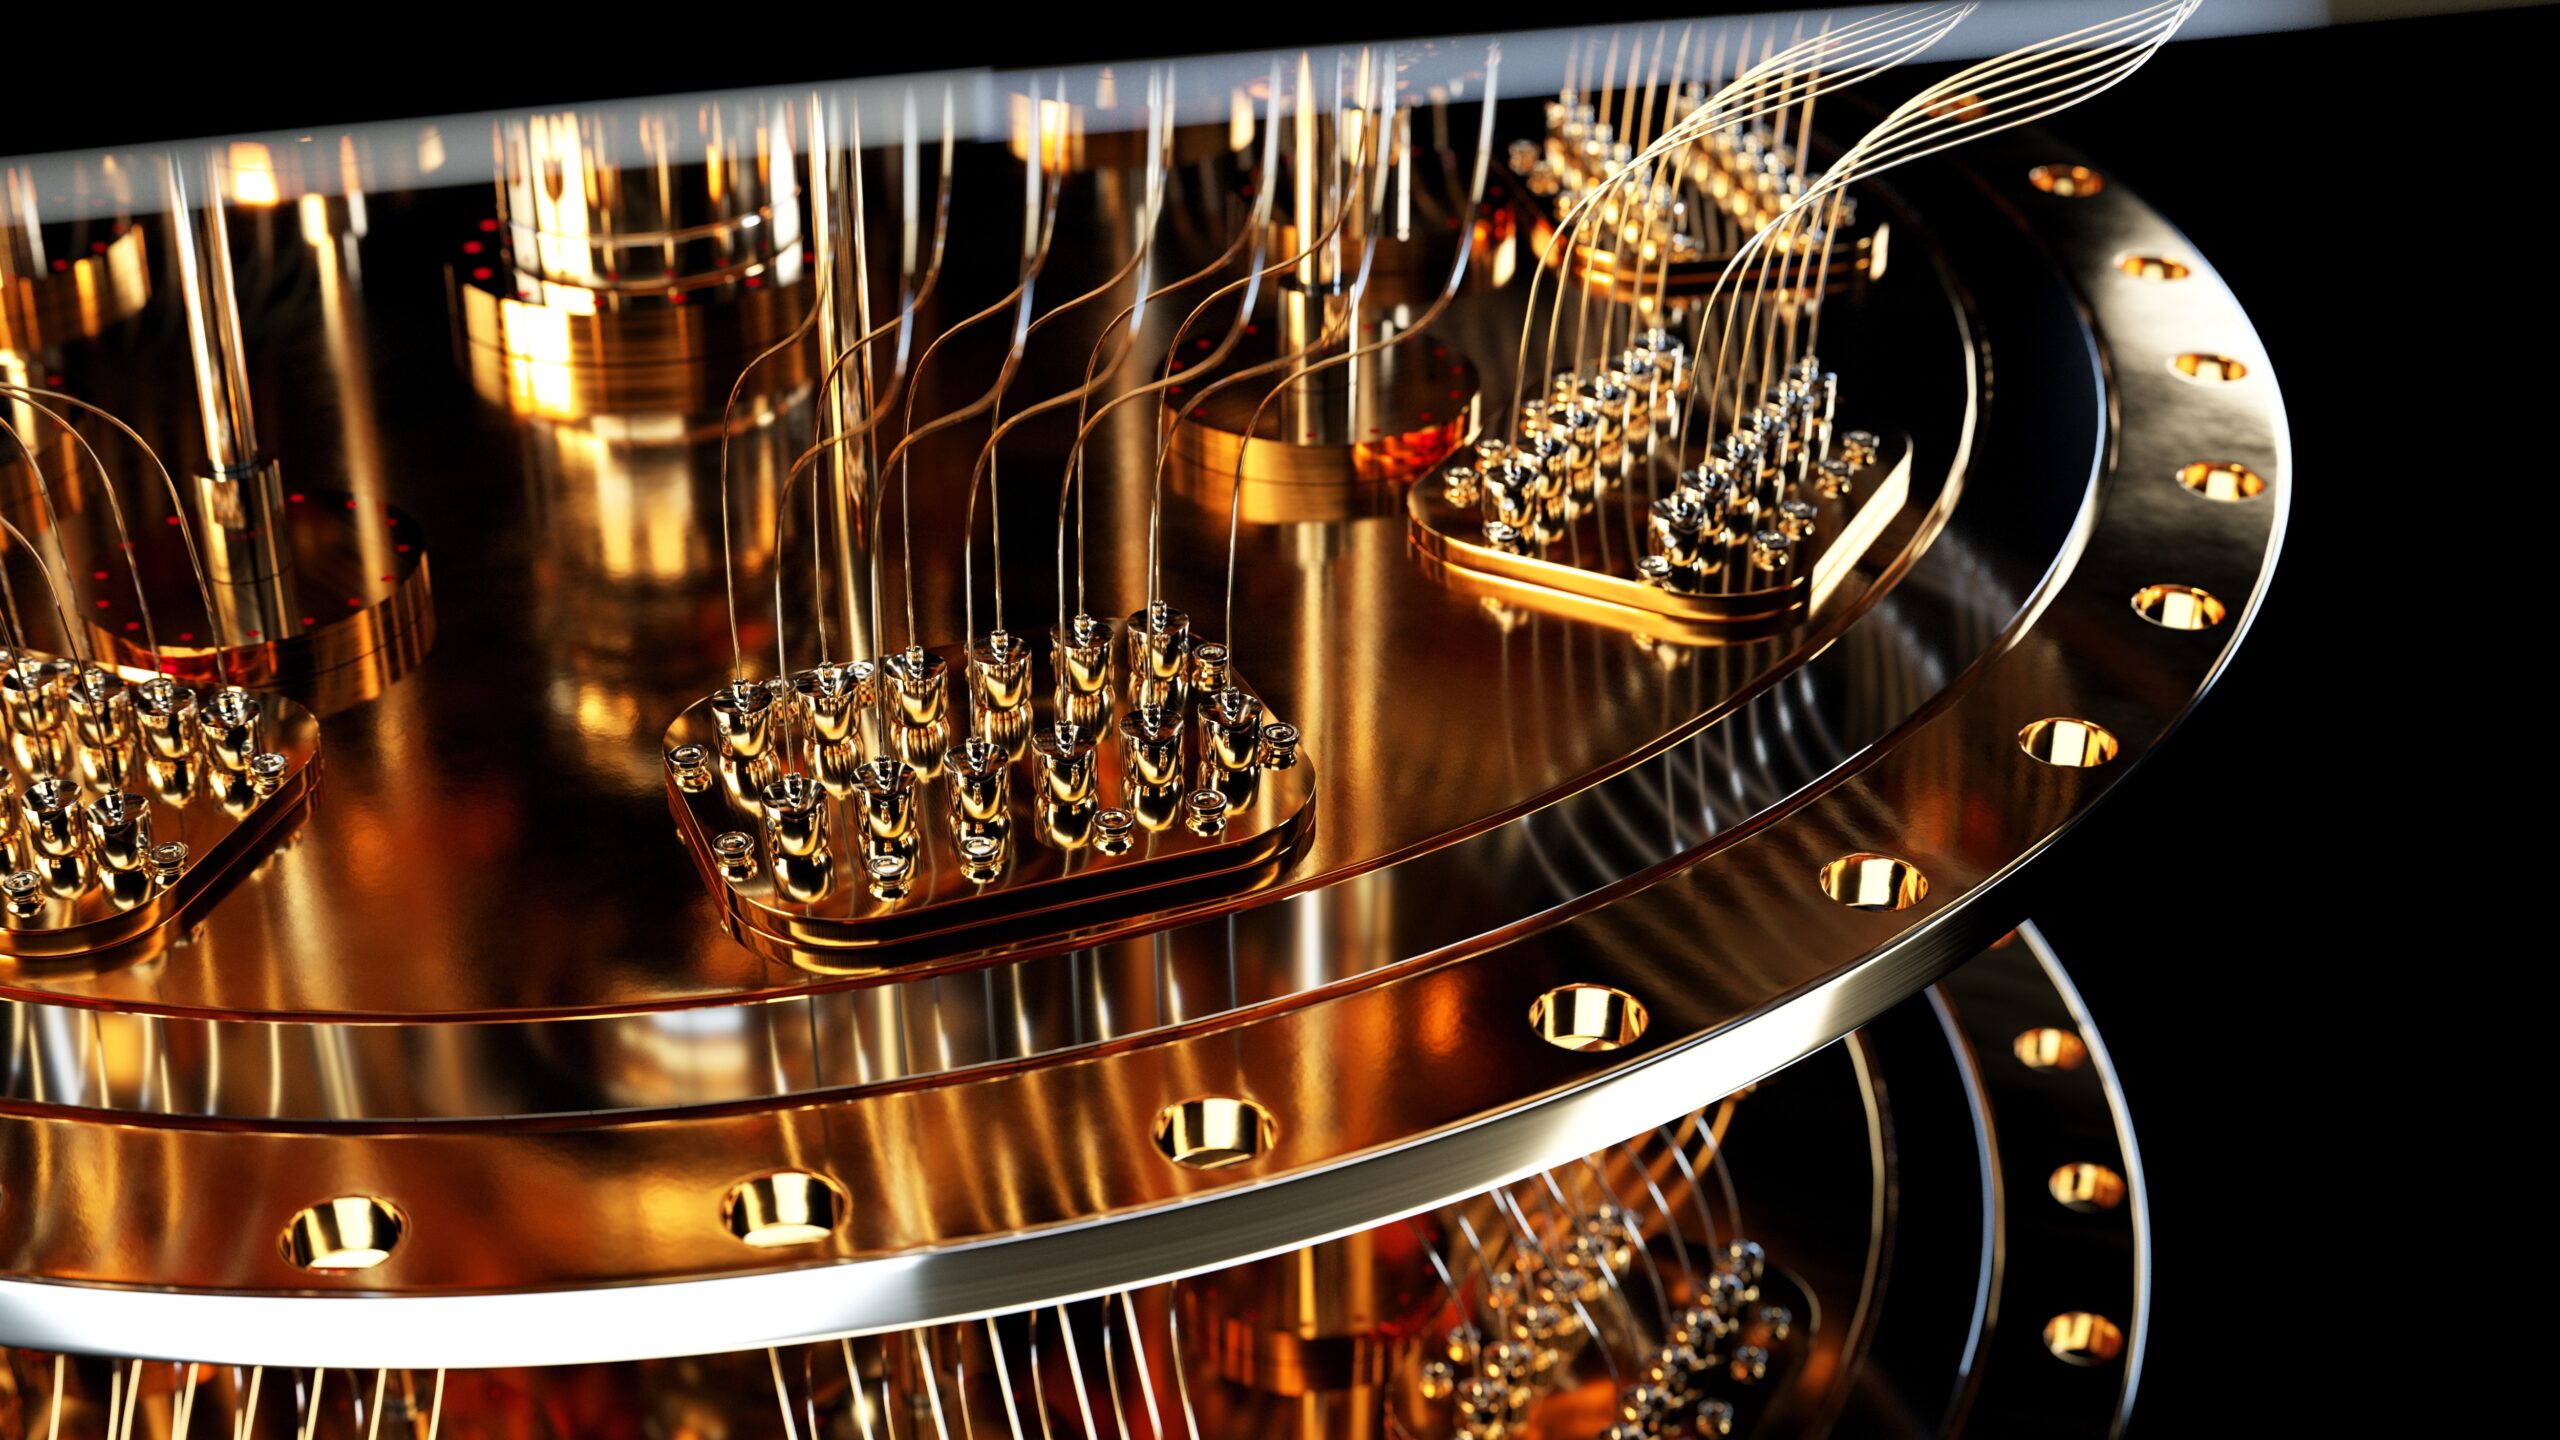 A recent wave of quantum computing investment has given rise to claims of a quantum computing bubble, based on overly optimistic technological claims 